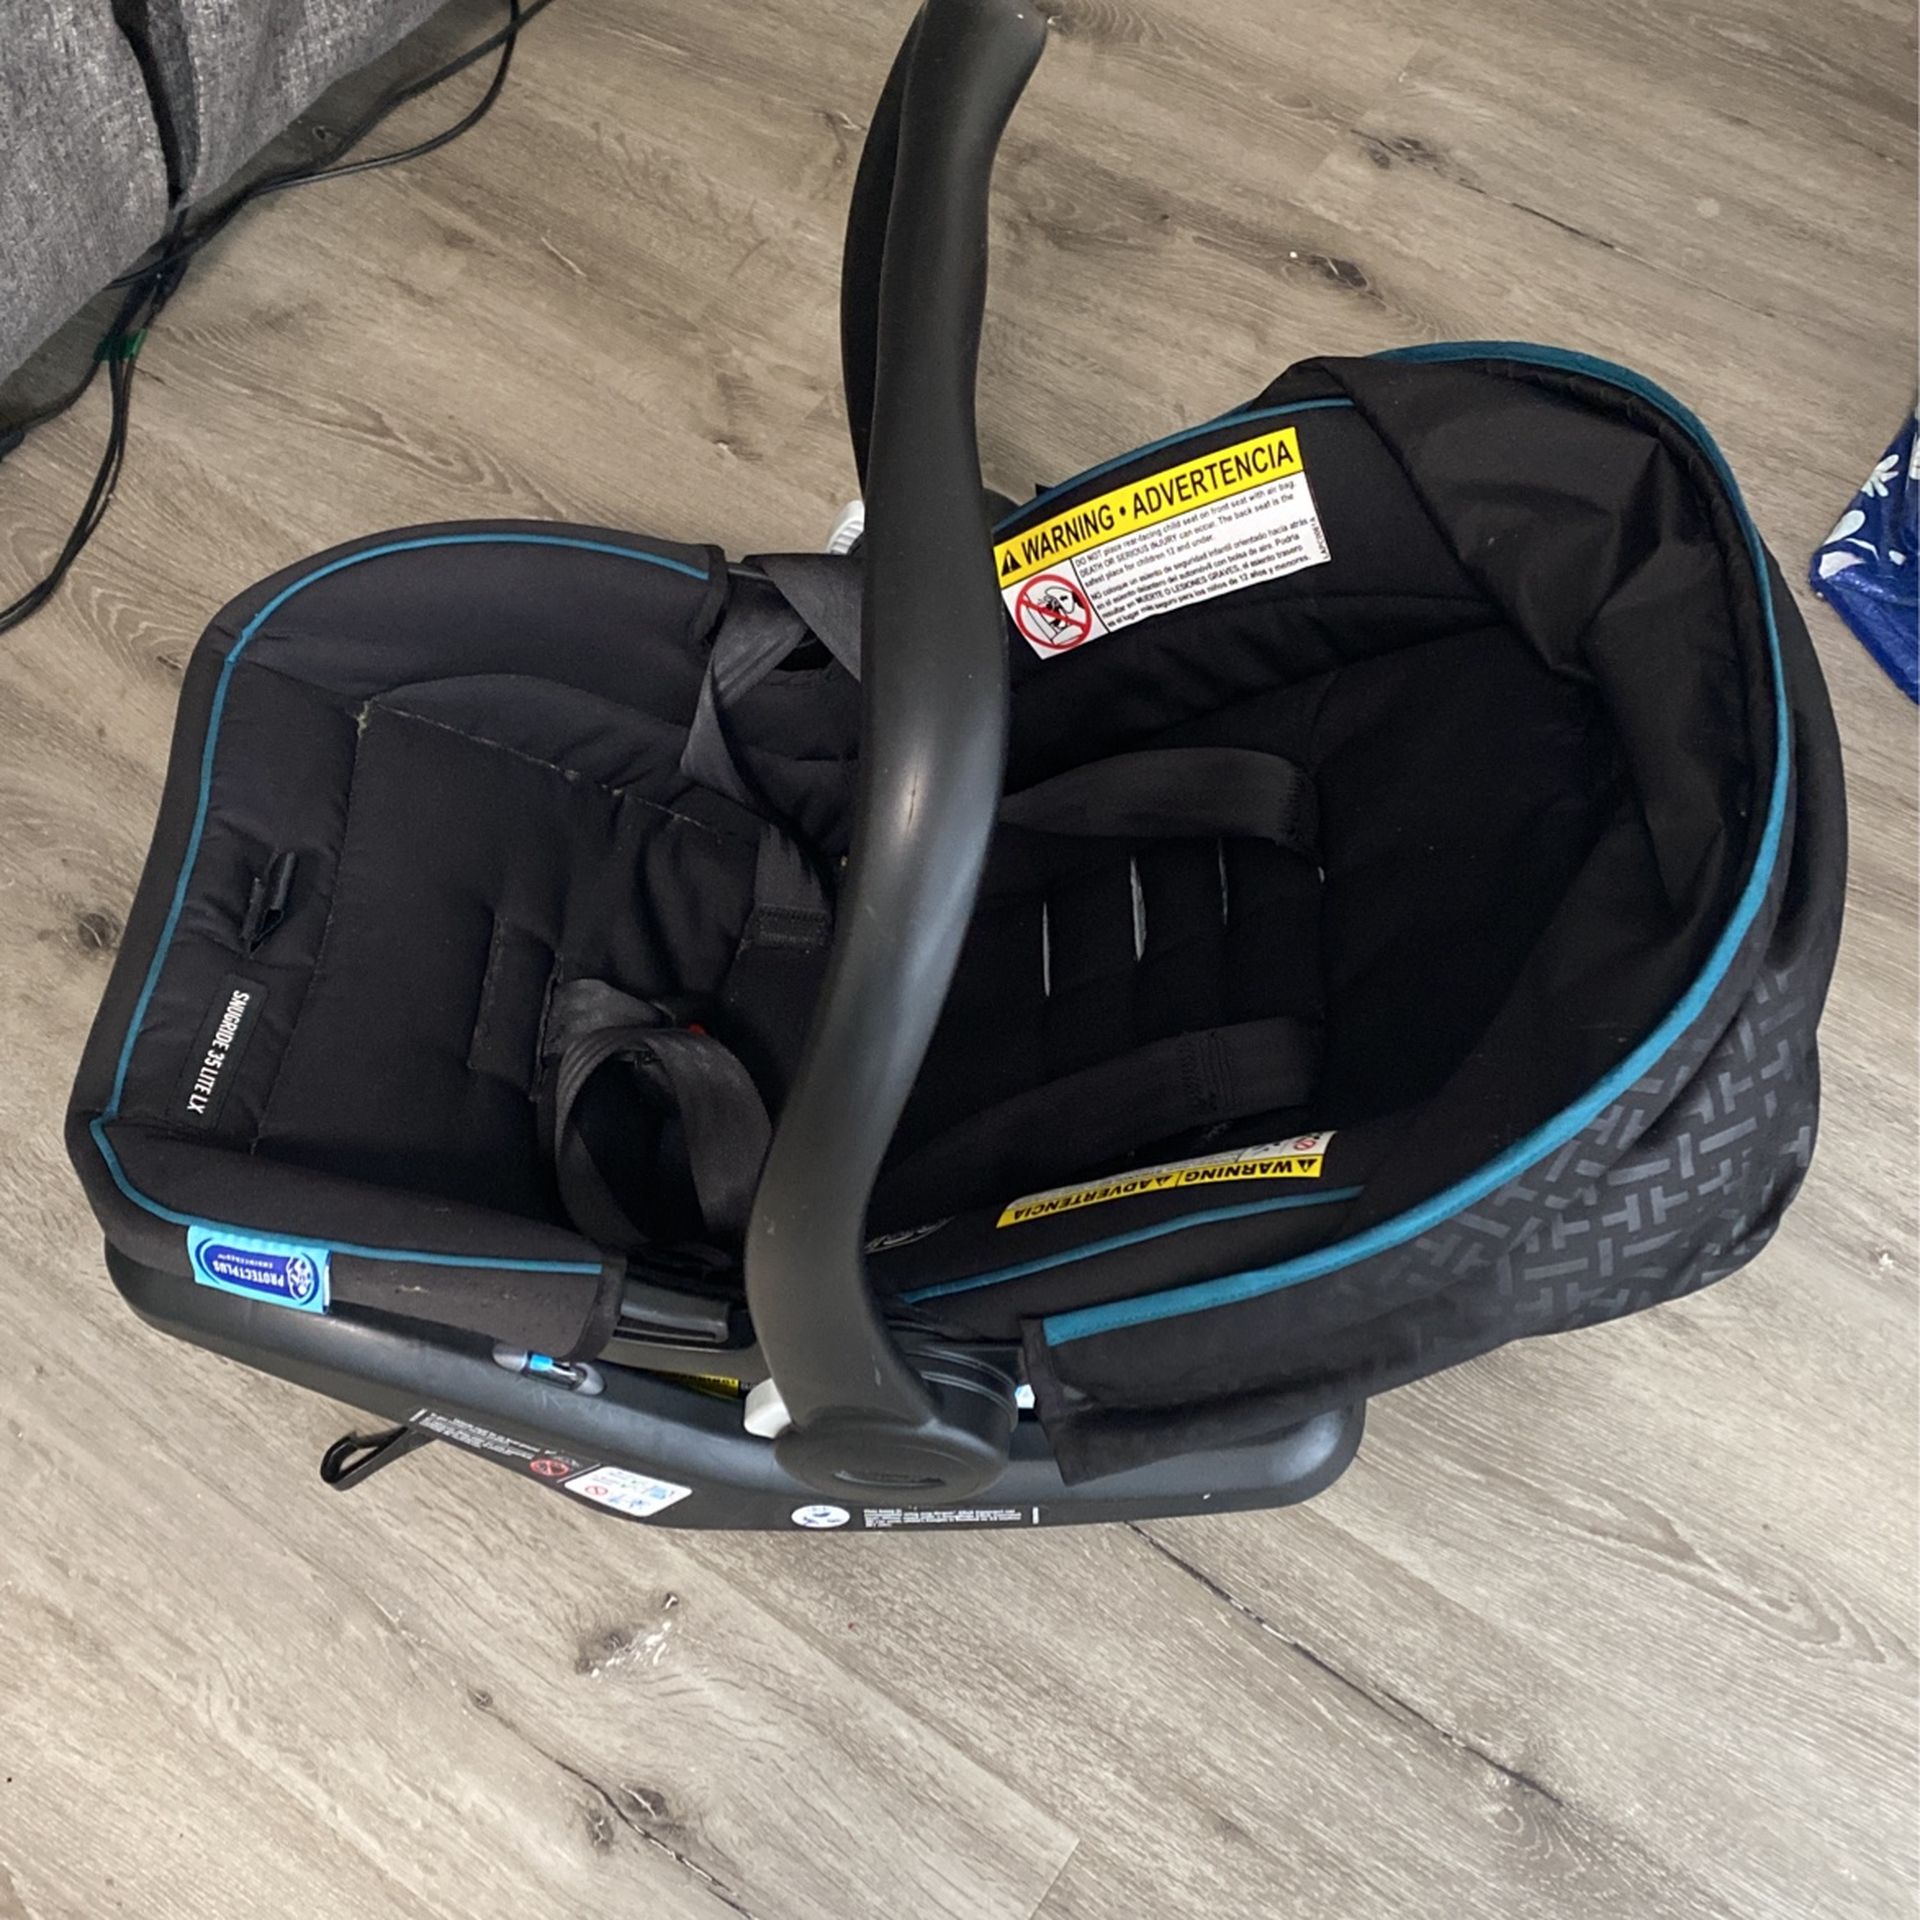 Graco Infant Car Seat With Base 